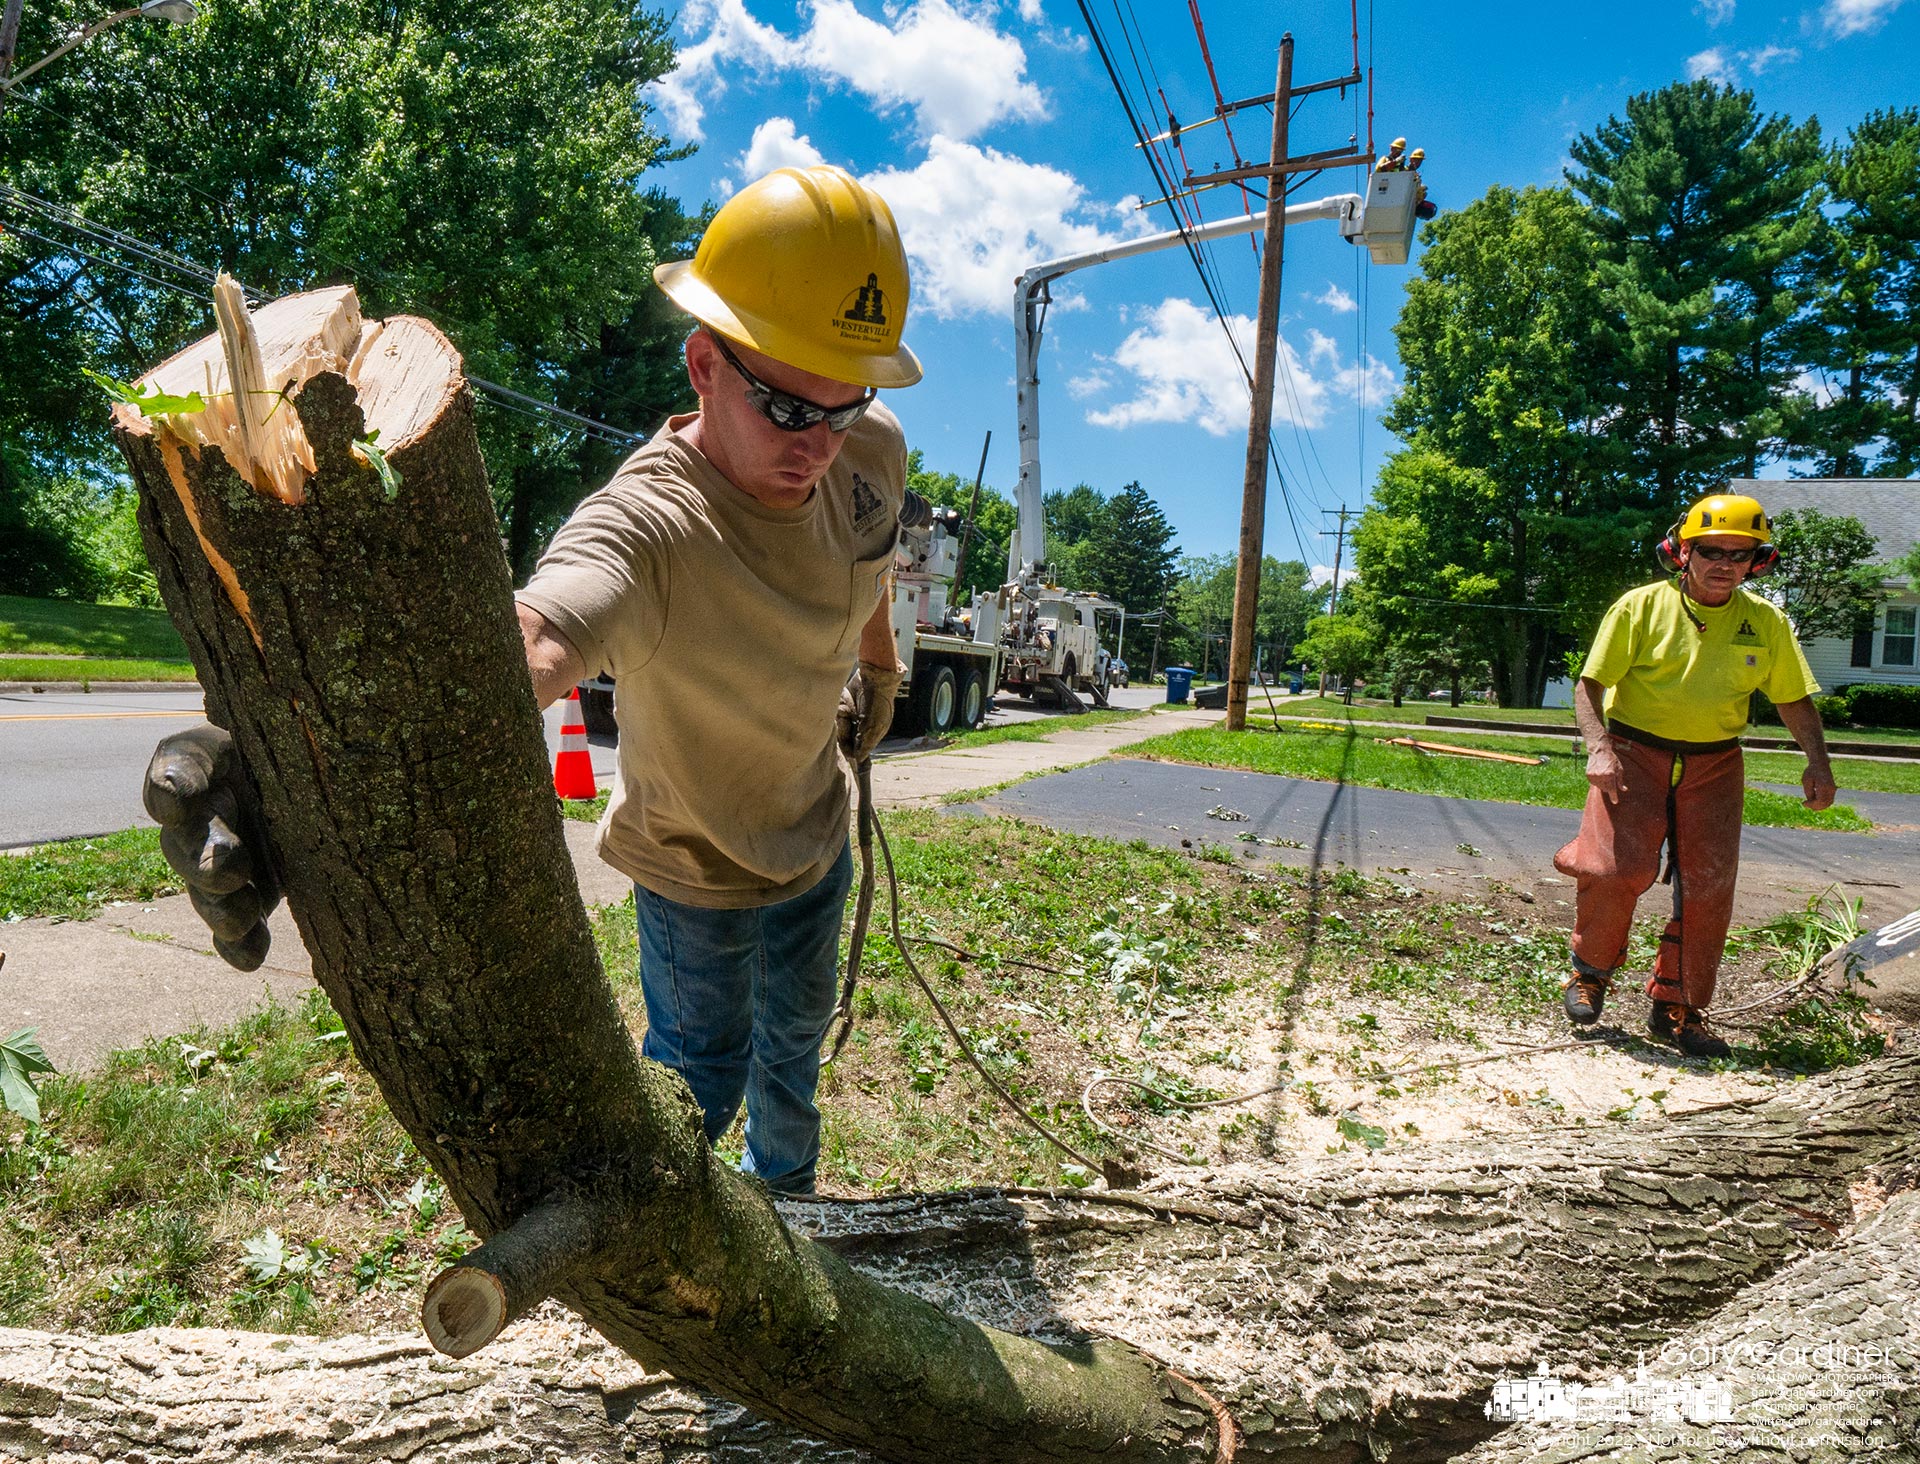 A Westerville electric work crew clears limbs and the trunk of a tree removed near a power line as a second crew replaces a utility pole that had seen its better days on East Walnut. My Final Photo for July 12, 2022.